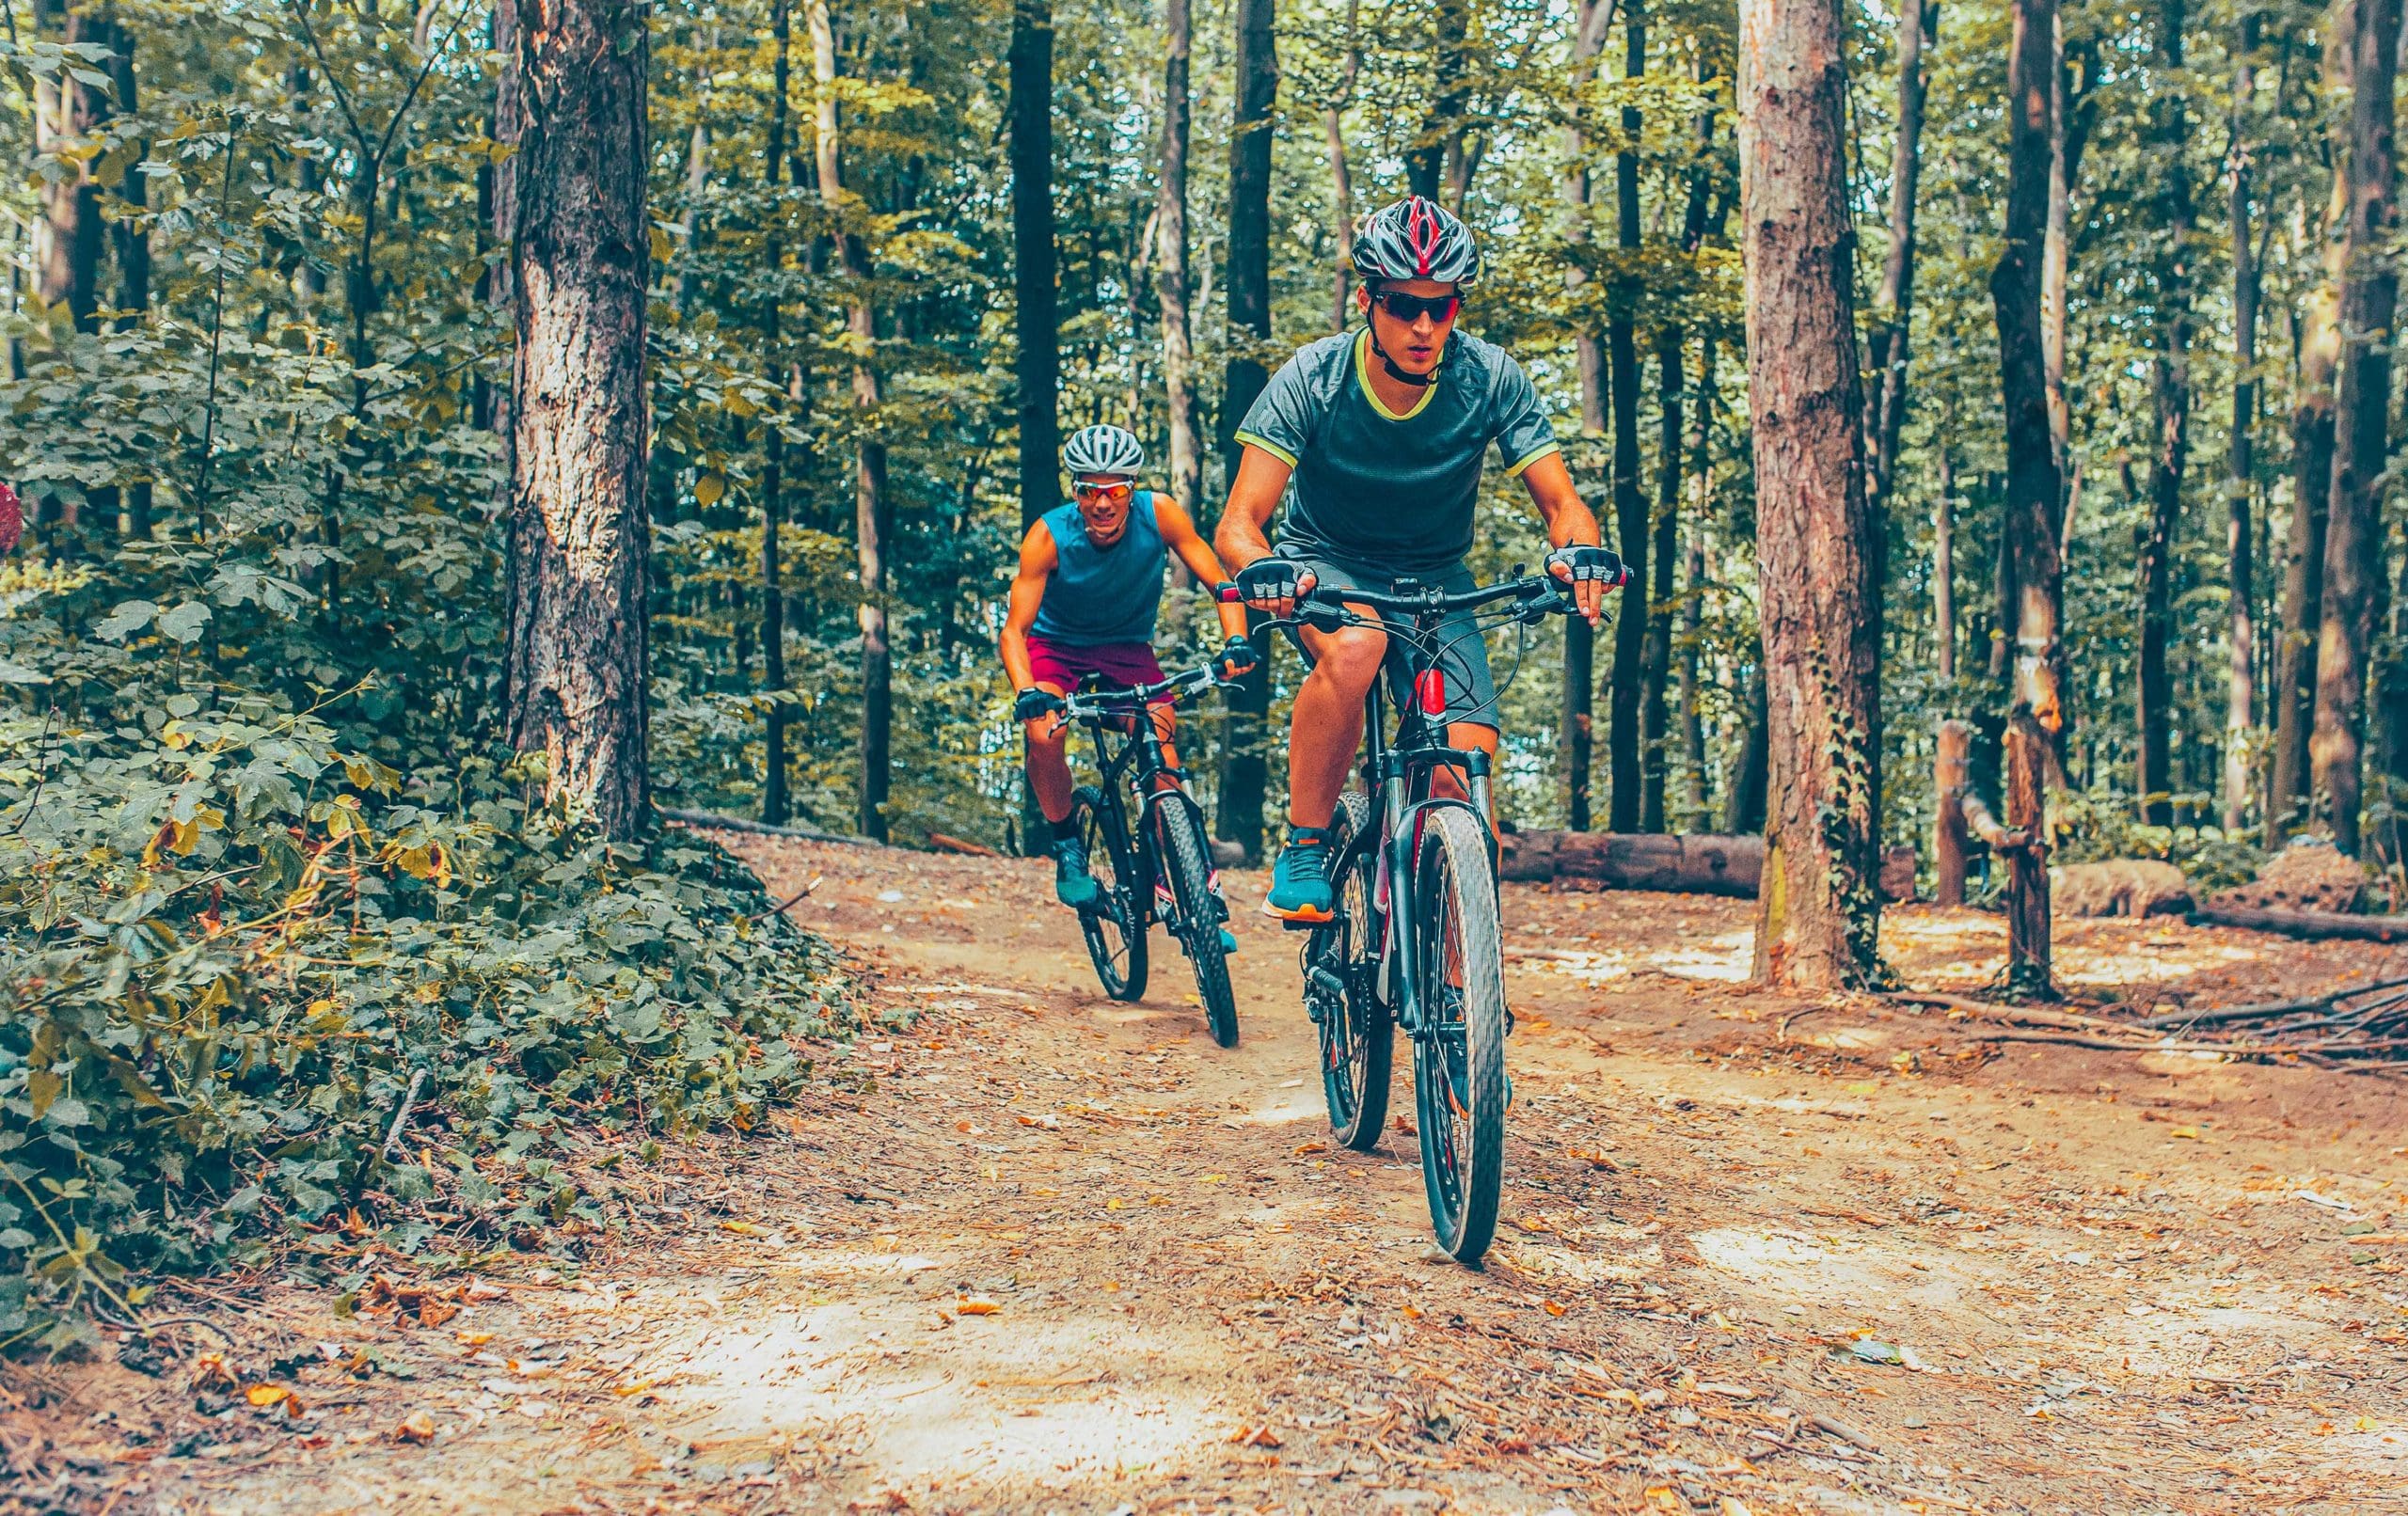 How to Get Started In Mountain Biking